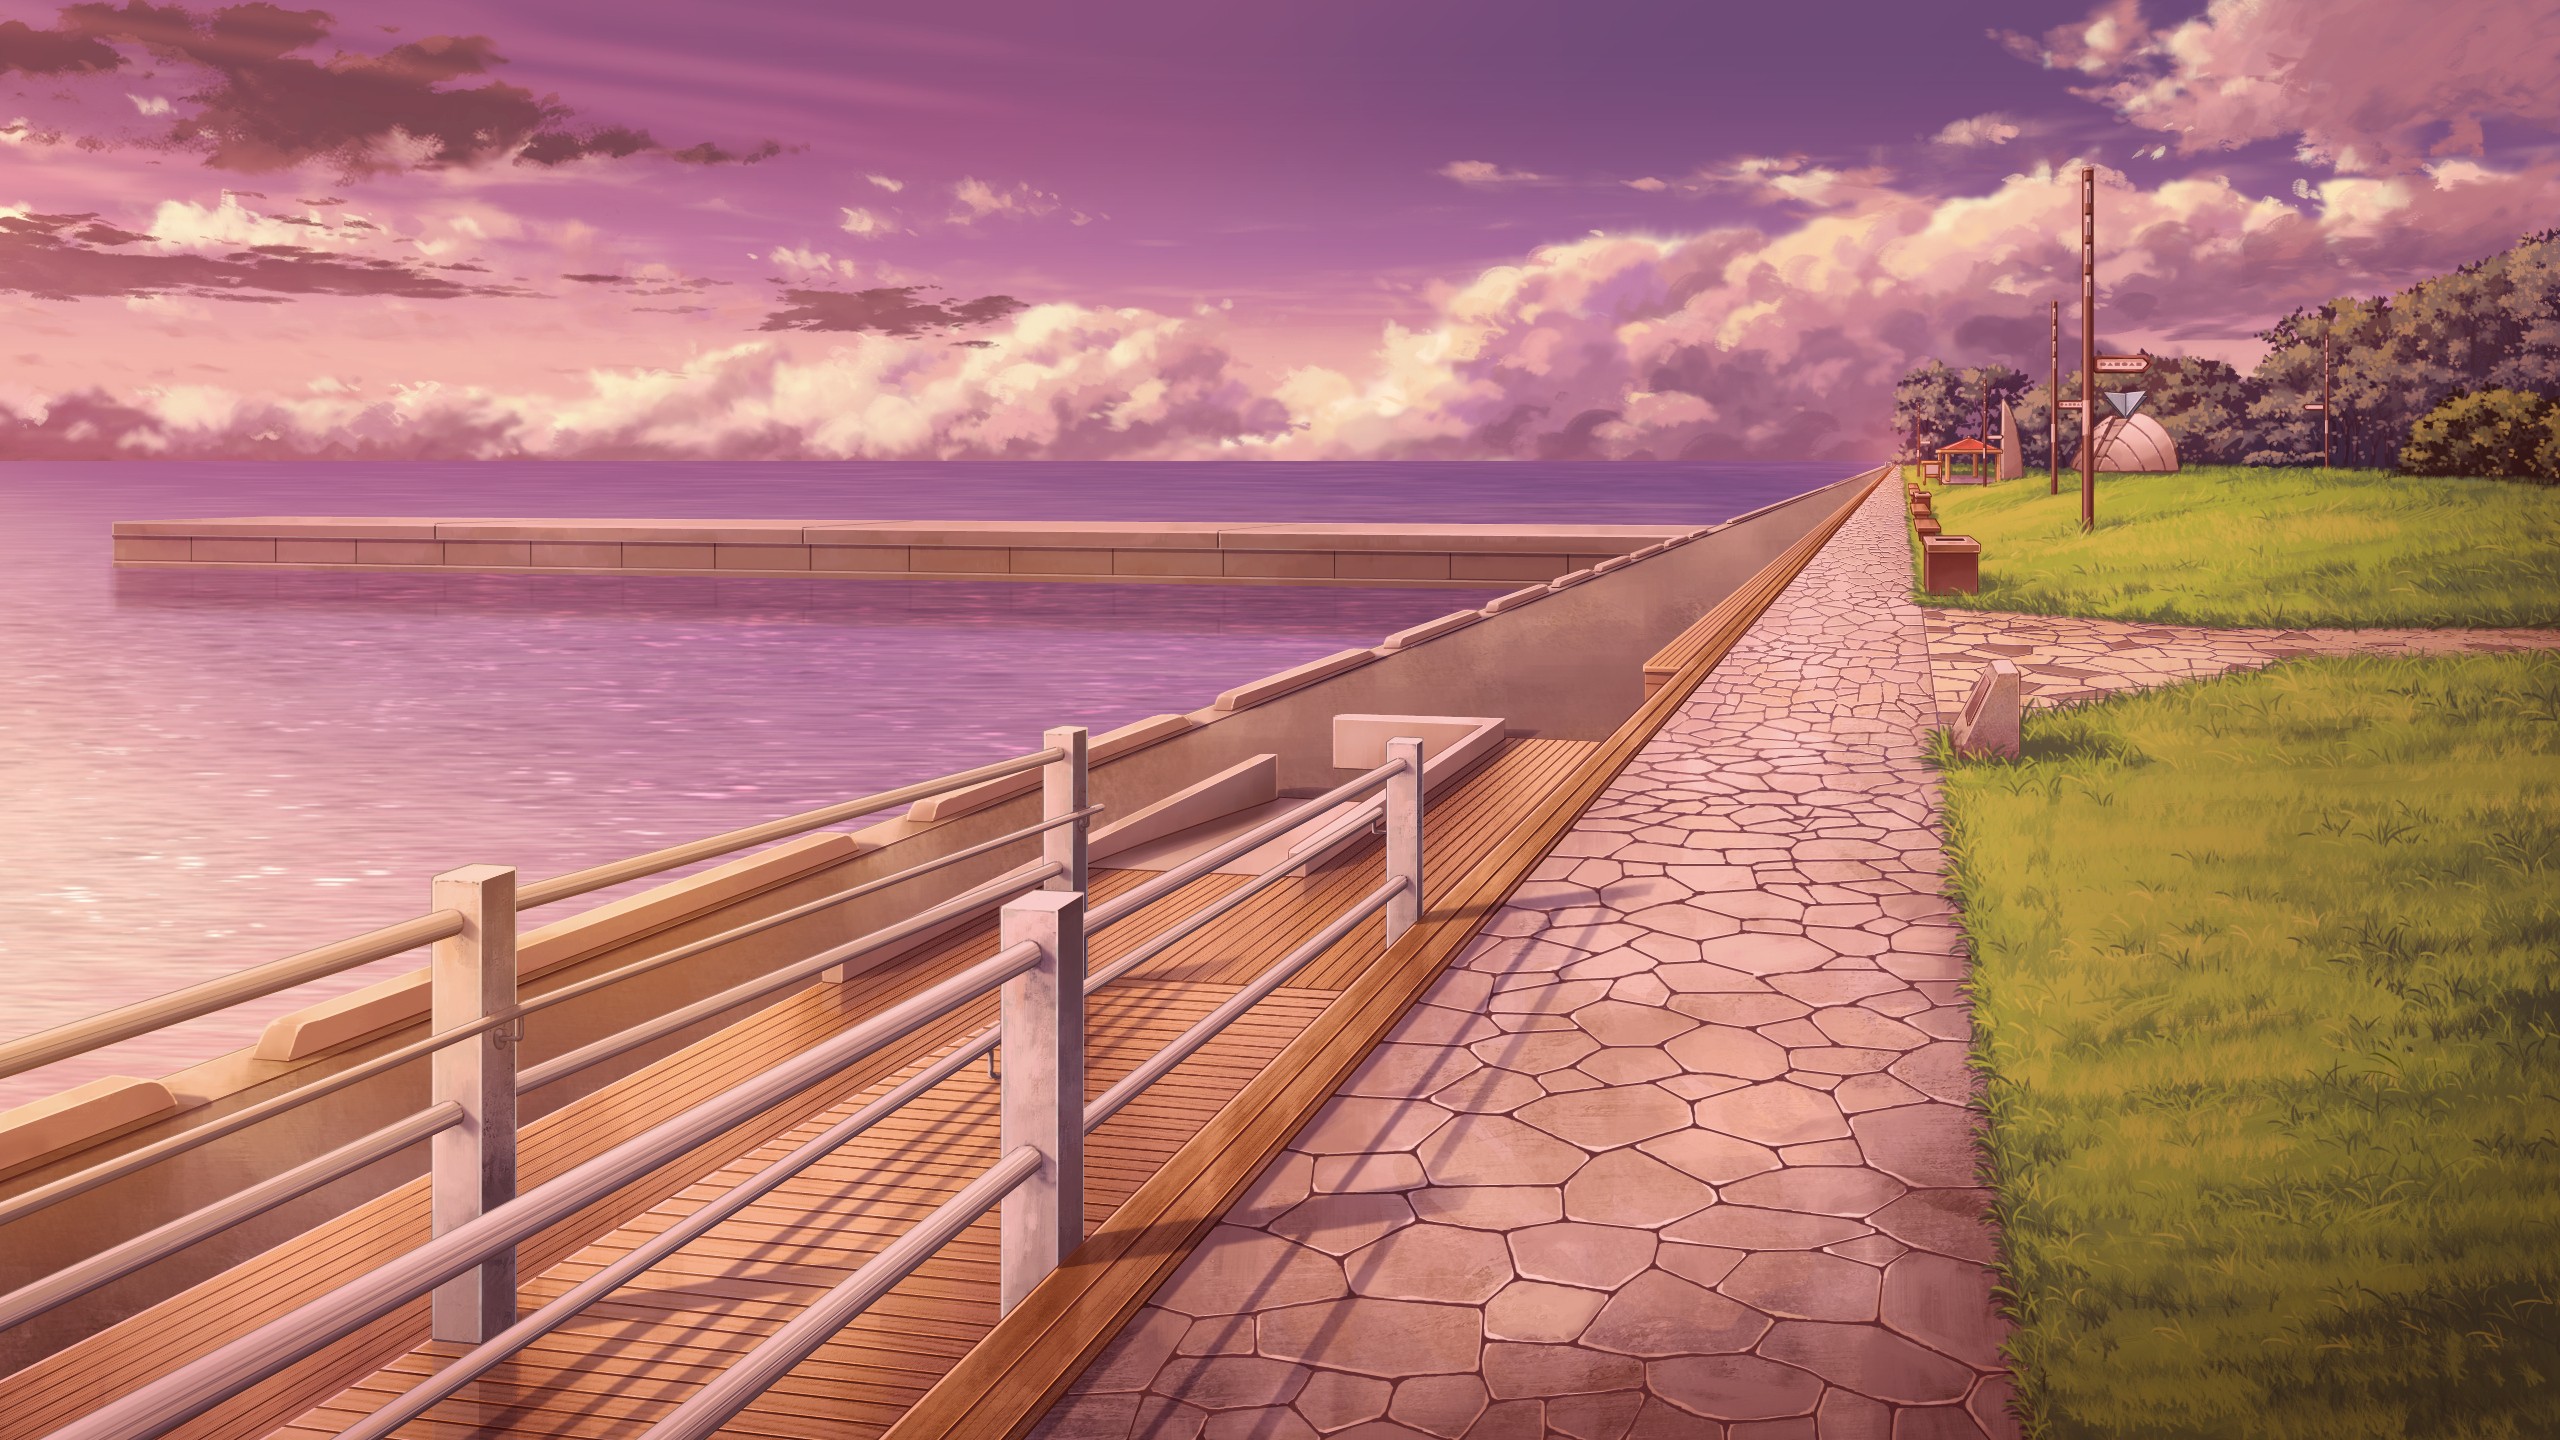 Free Download Hd Anime Background Scenery Wallpapers High